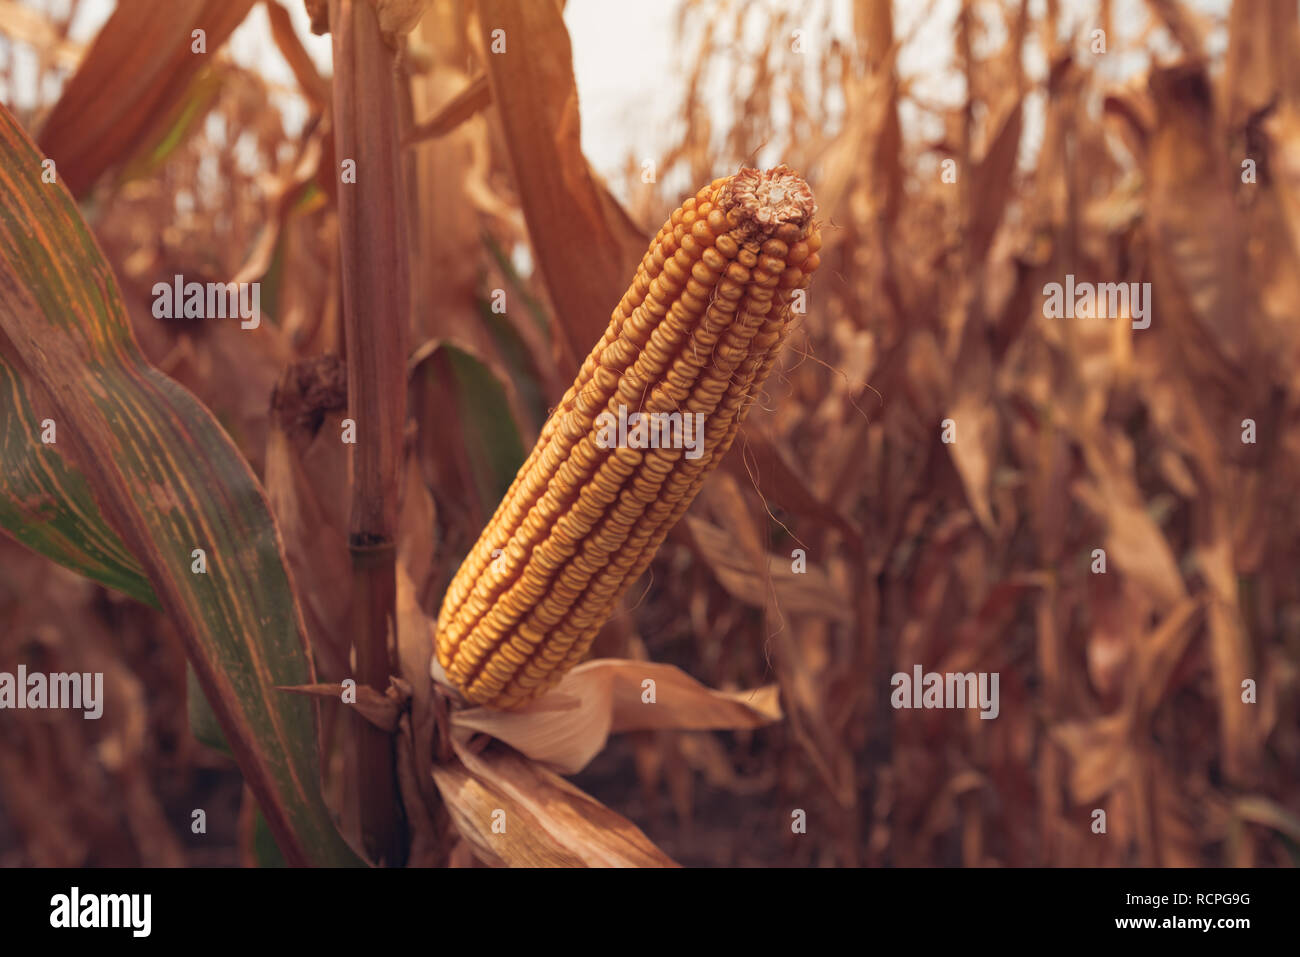 Corn on the cob in cultivated field Stock Photo